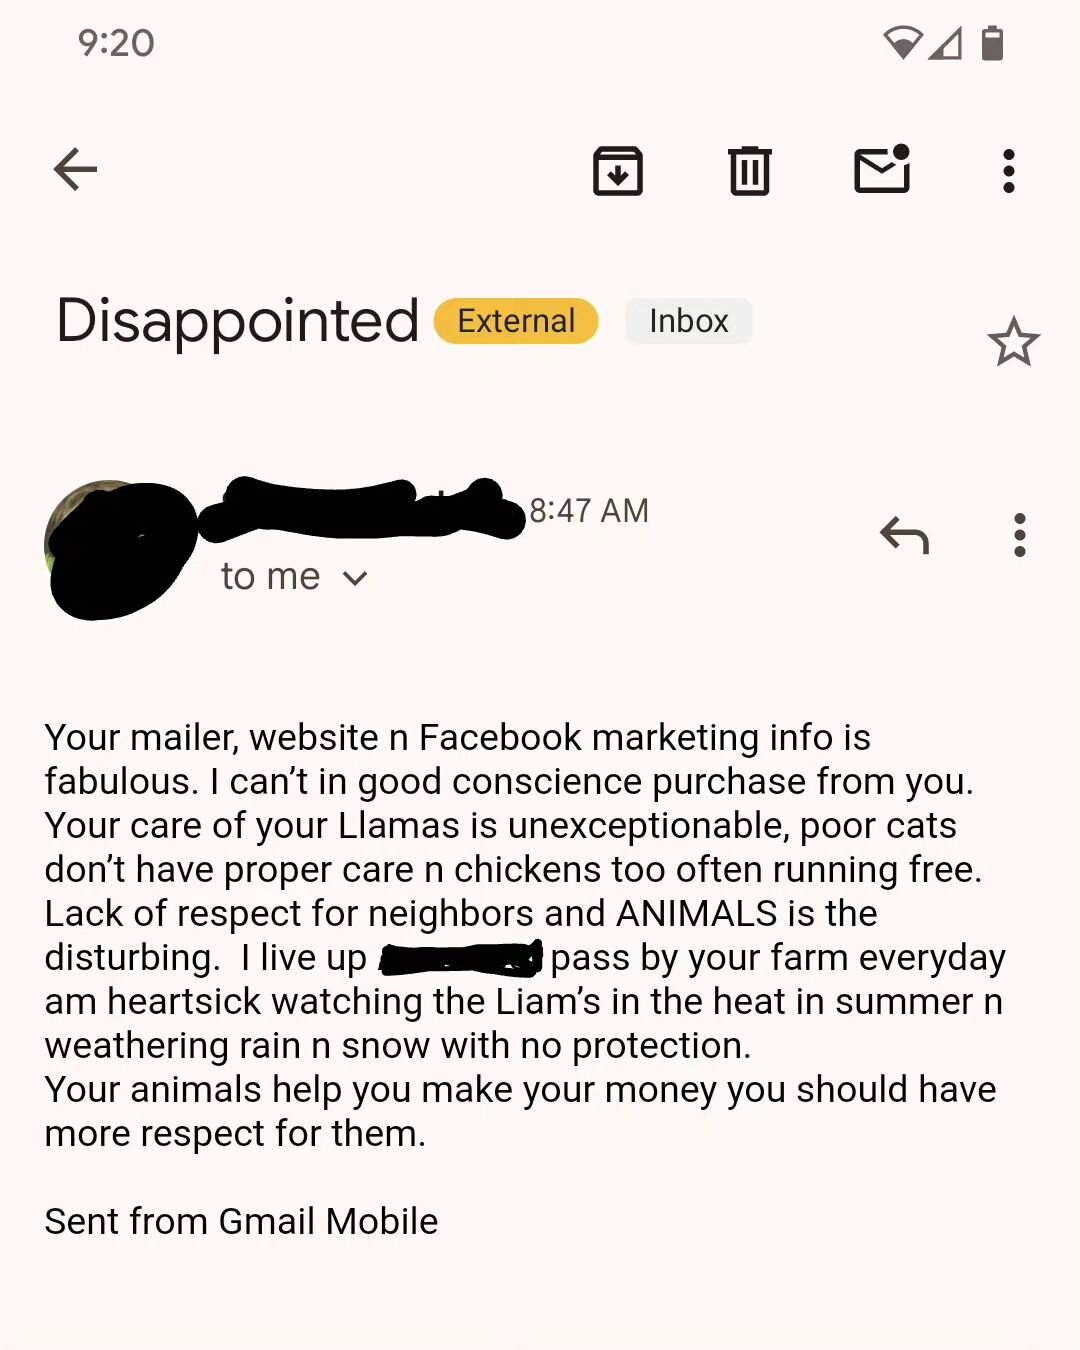 We got this email yesterday and it's been weighing heavily on our hearts and minds since then. I feel hurt, defensive, and attacked, and want to publicly address this person's concerns.

We are very proud of our farming practices and stand behind the